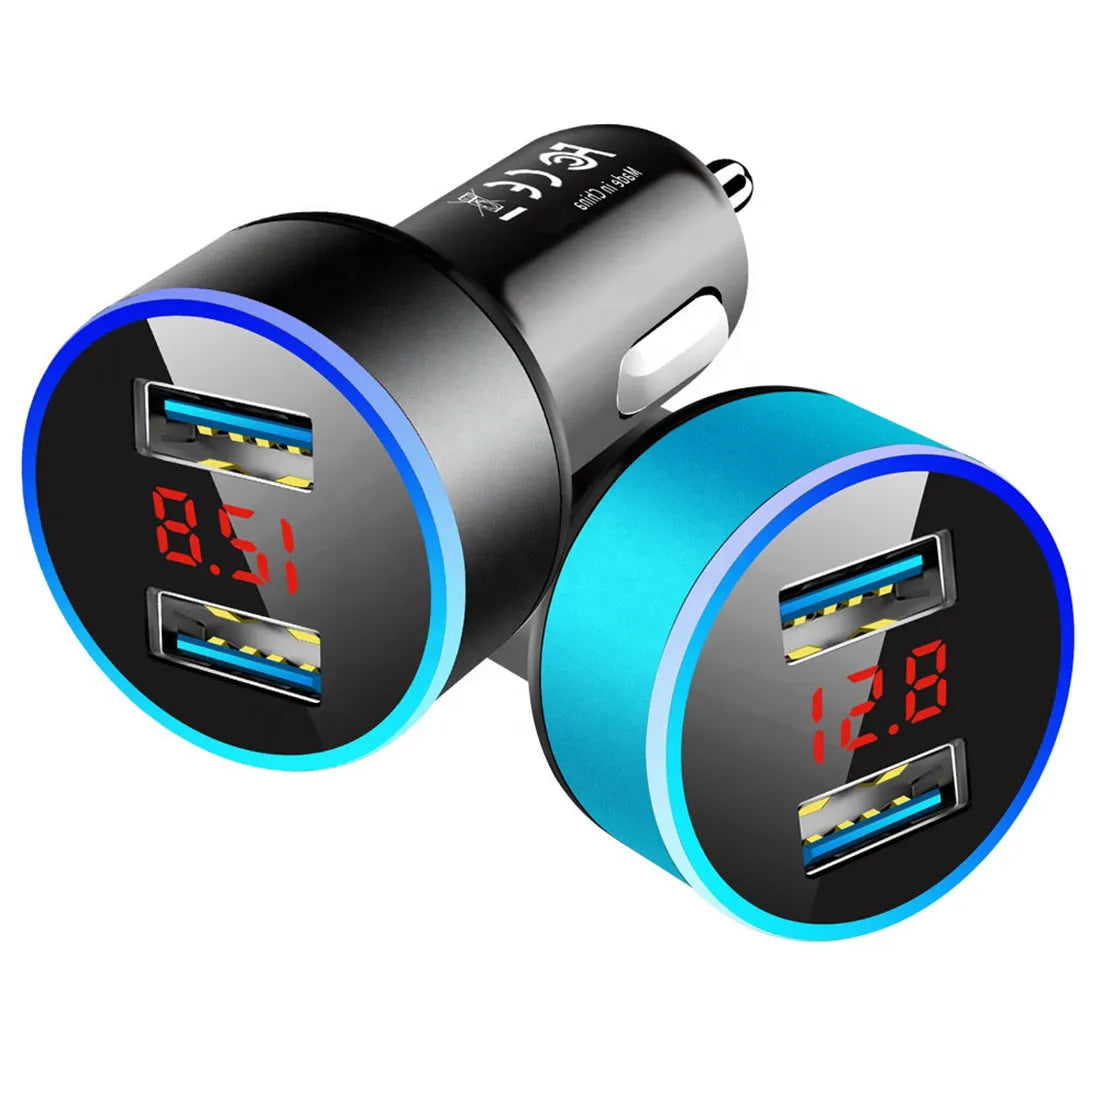 Muvit 20W Dual USB Port Car Charger